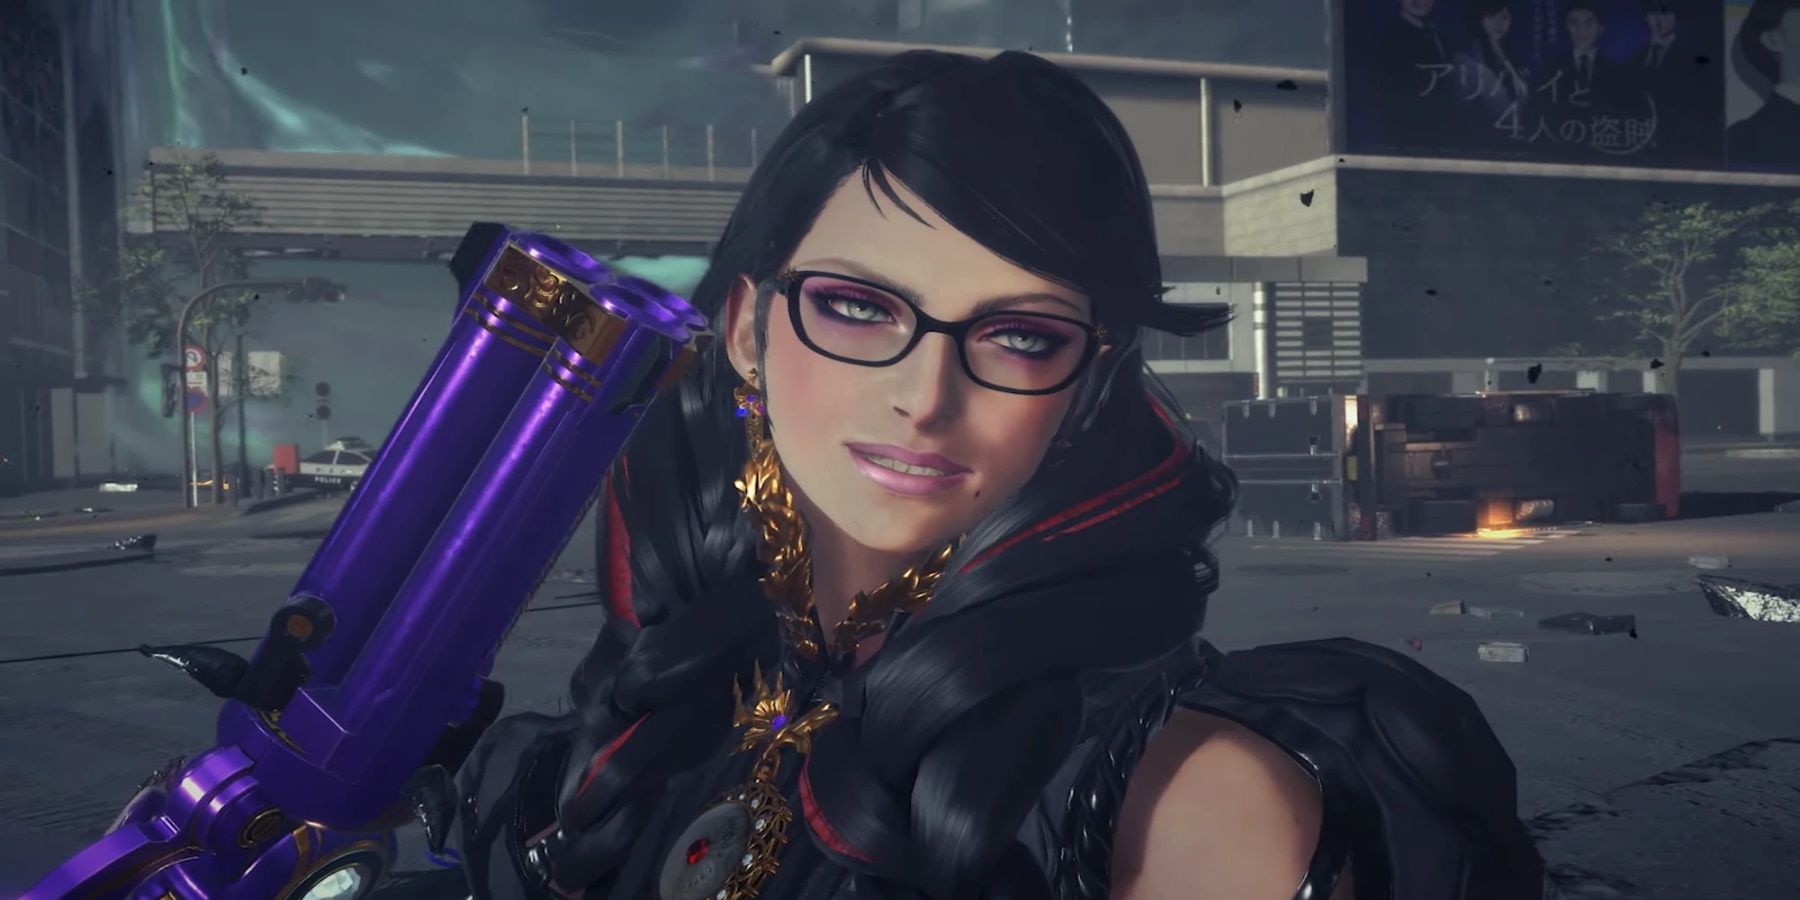 bayonetta 3 pose from the trailer